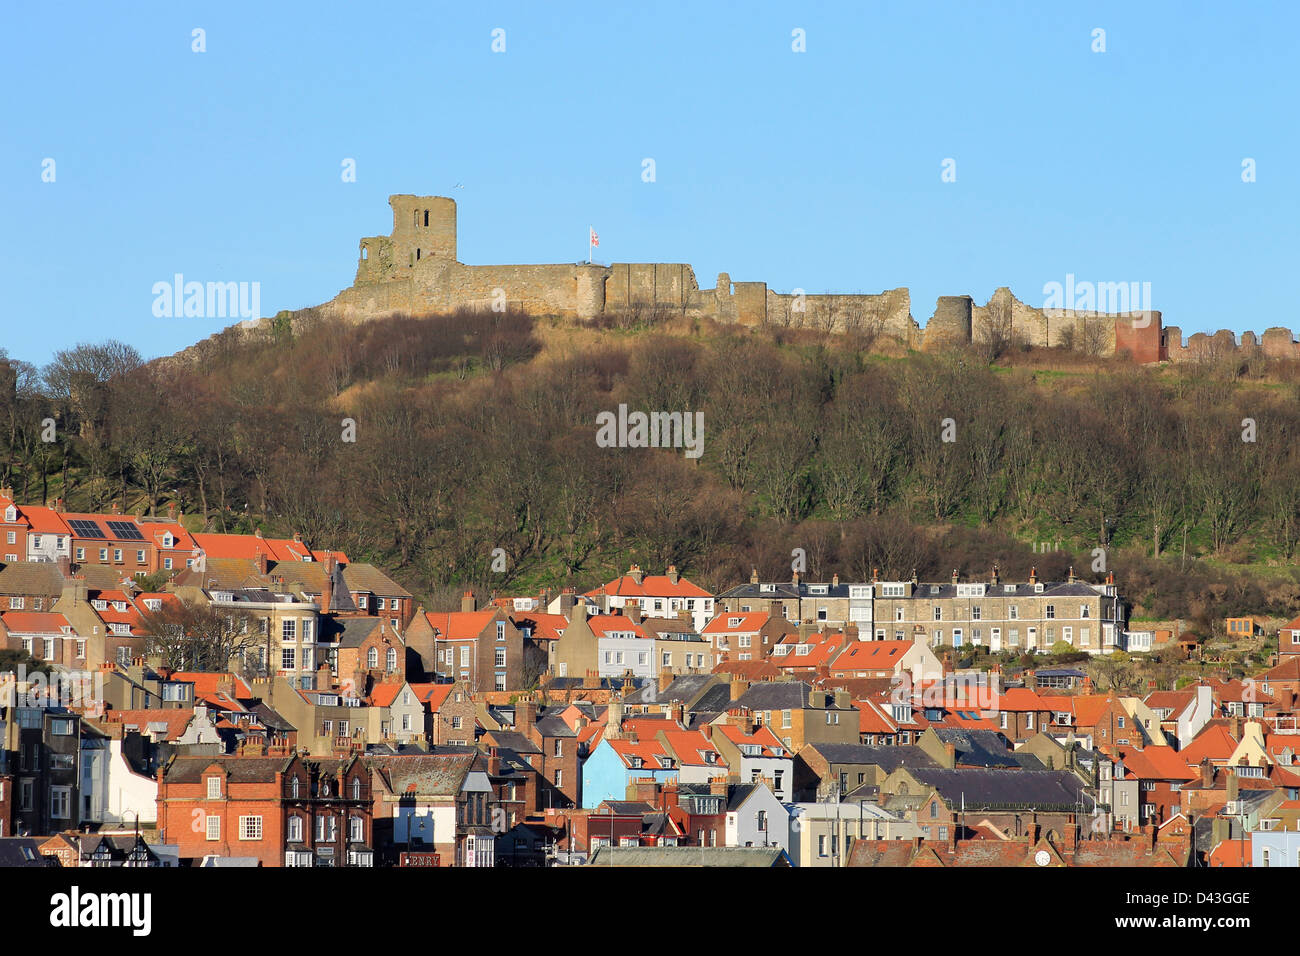 Scenic view of Scarborough Castle and Old town, England. Stock Photo